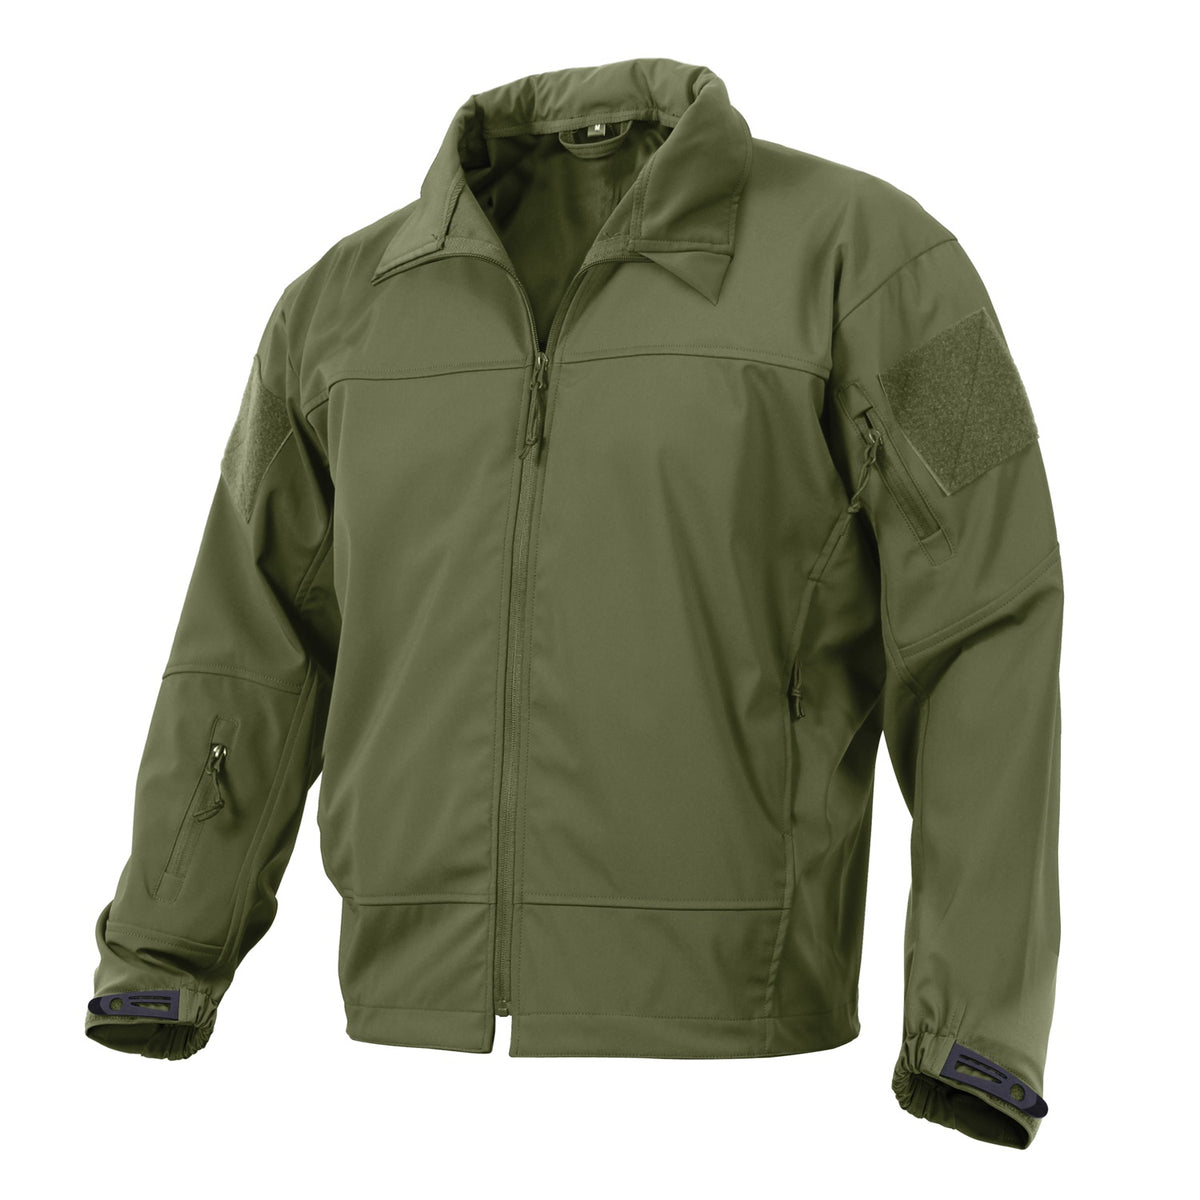 Rothco Covert Ops Light Weight Soft Shell Jacket